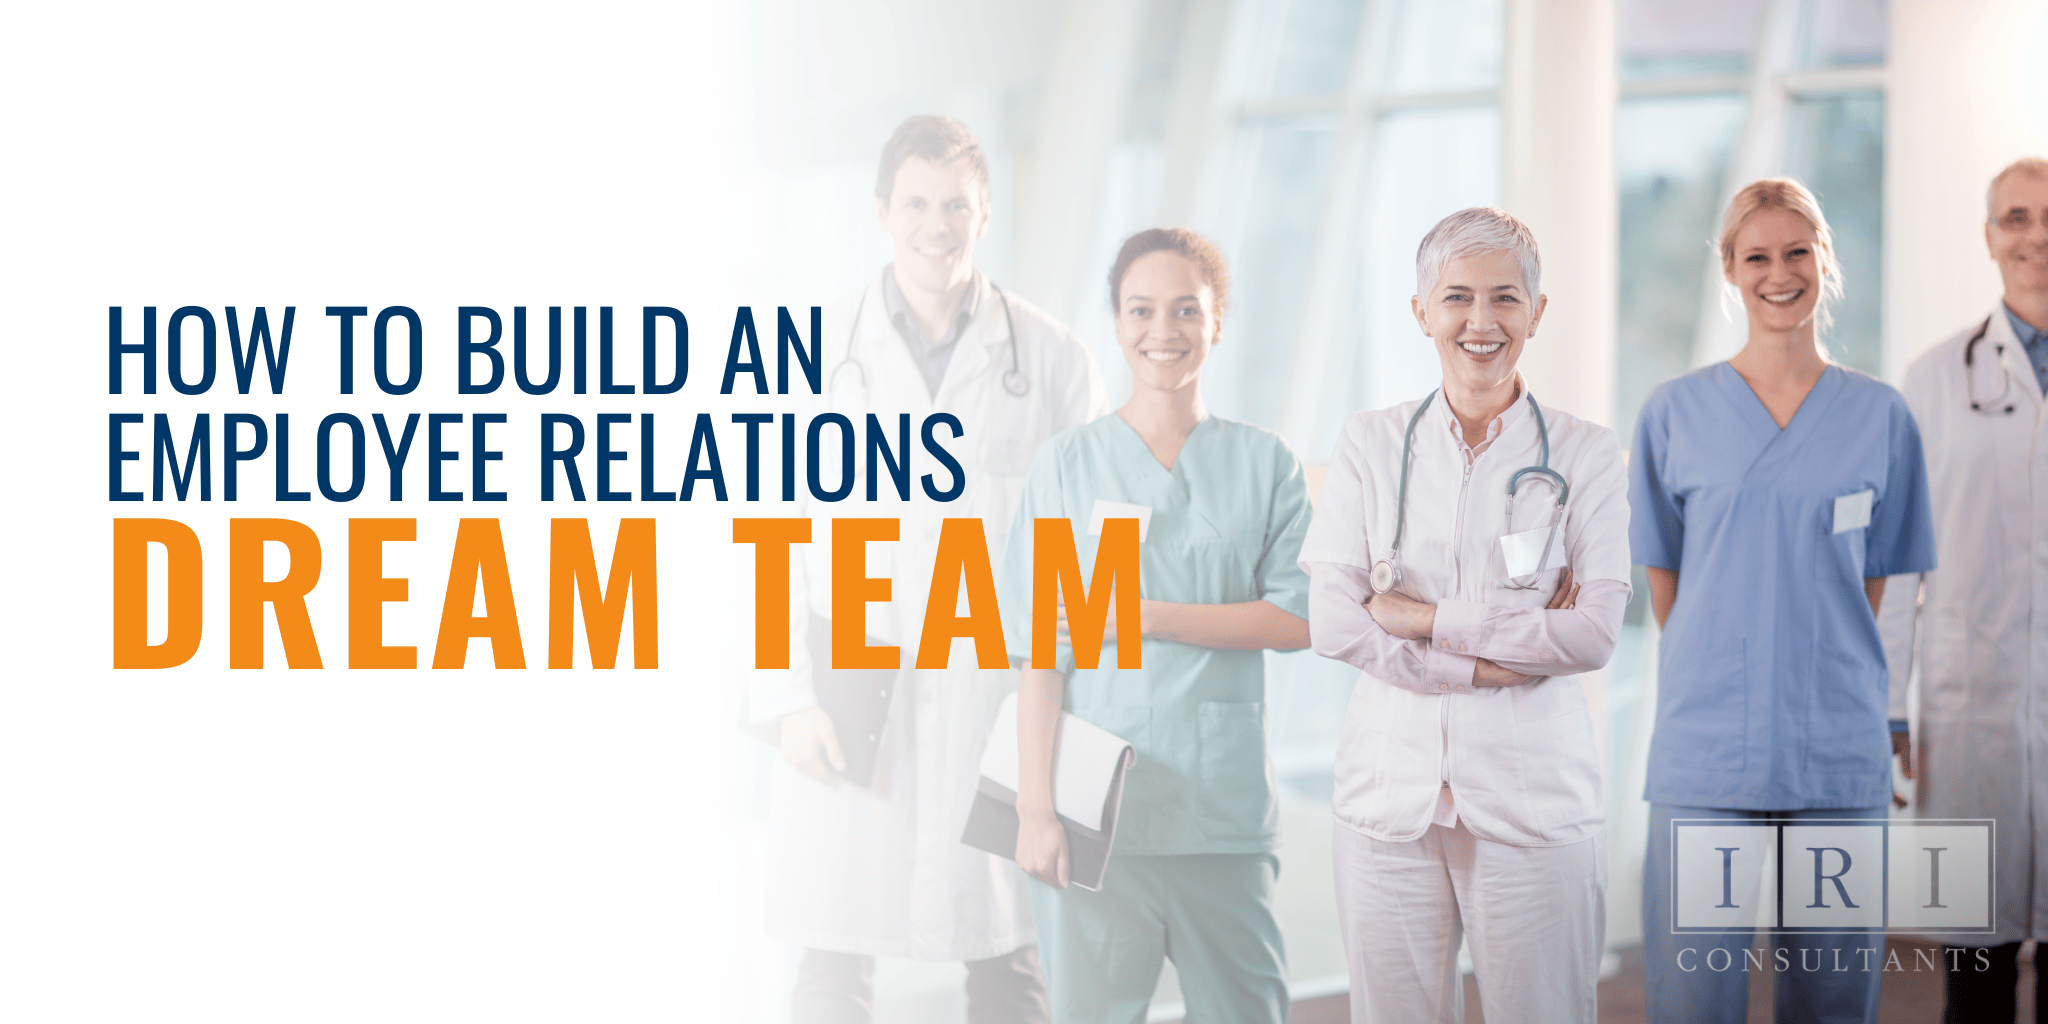 How To Build An Employee Relations Dream Team